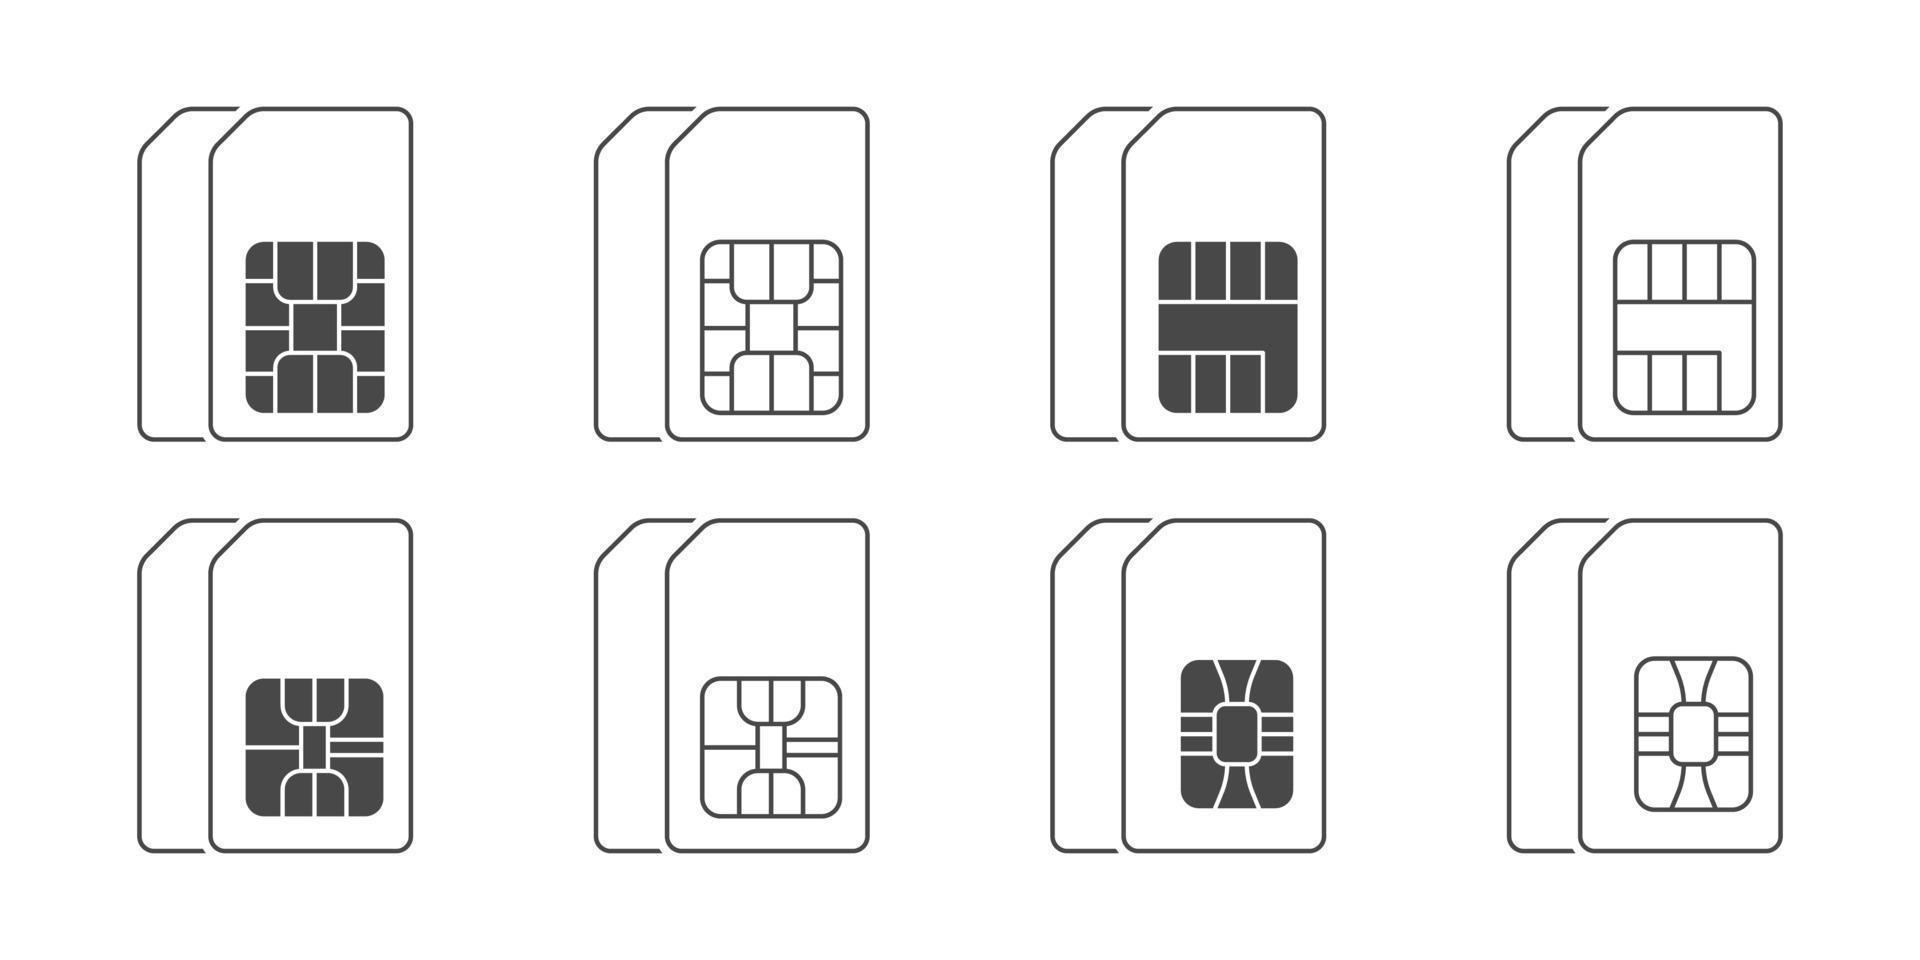 Dual sim card icons. SIM card icons set. Linear icons of sim cards of mobile phones. Vector illustration